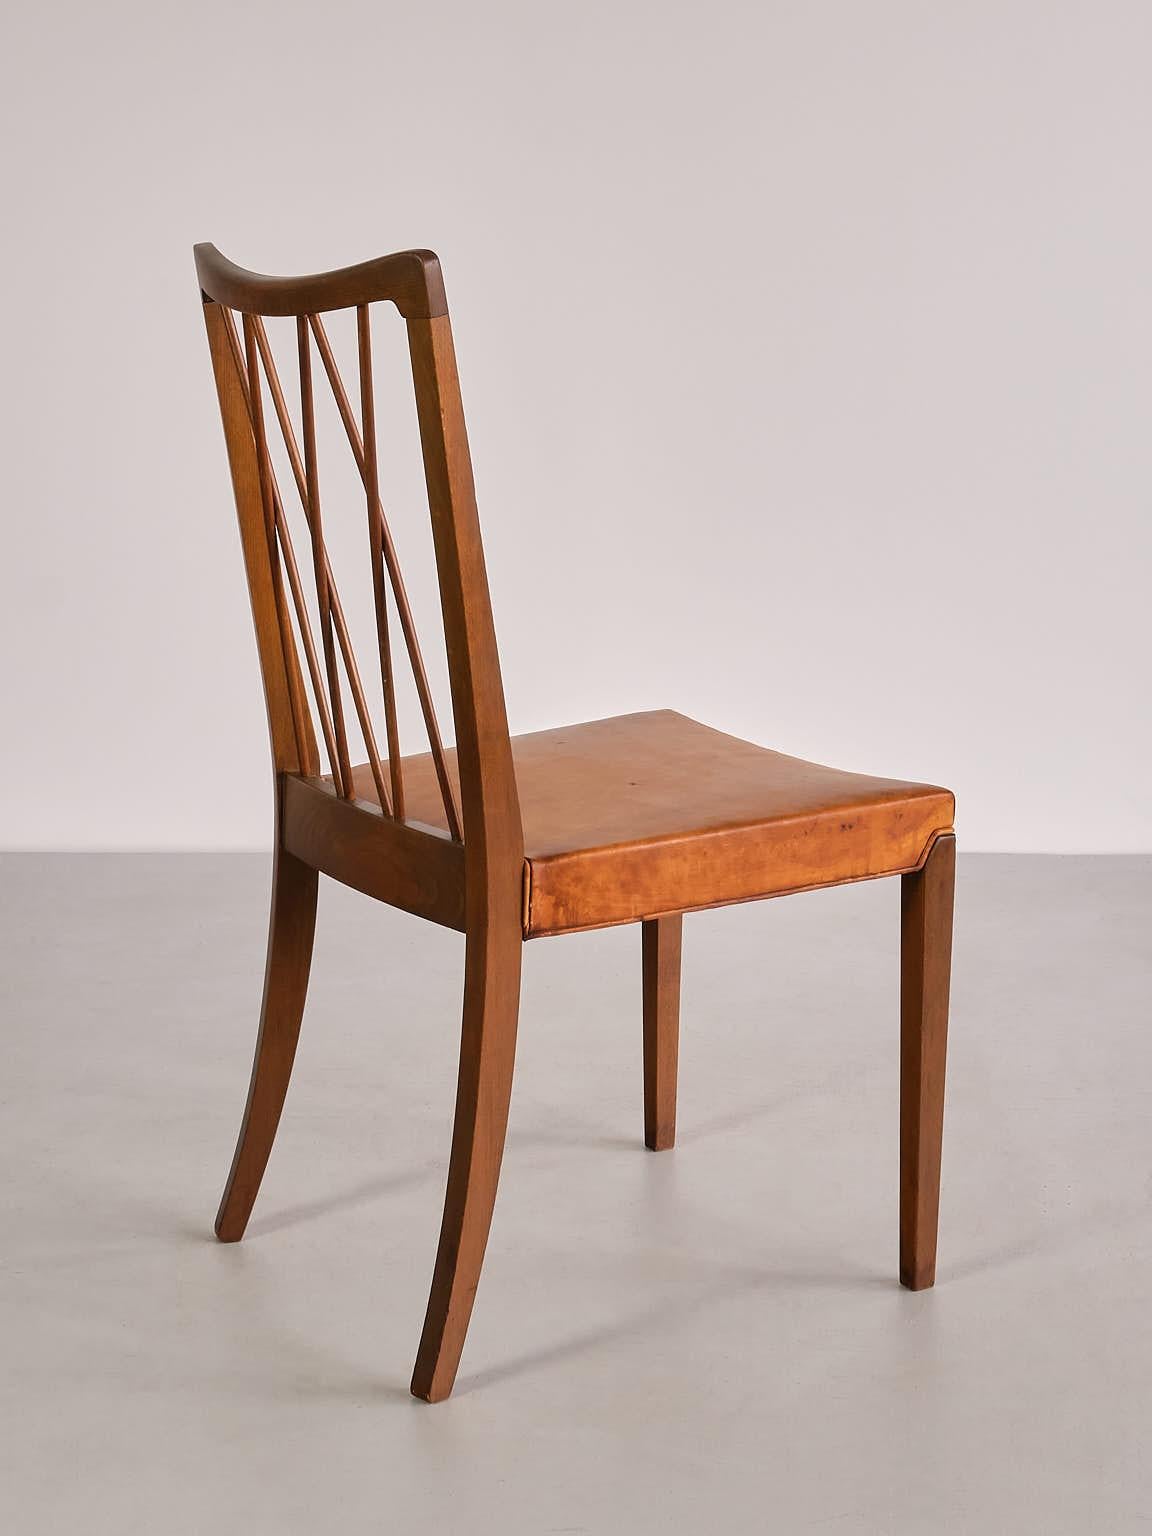 Set of Eight Frode Holm Dining Chairs, Walnut and Leather, Illum, Denmark, 1940s For Sale 11